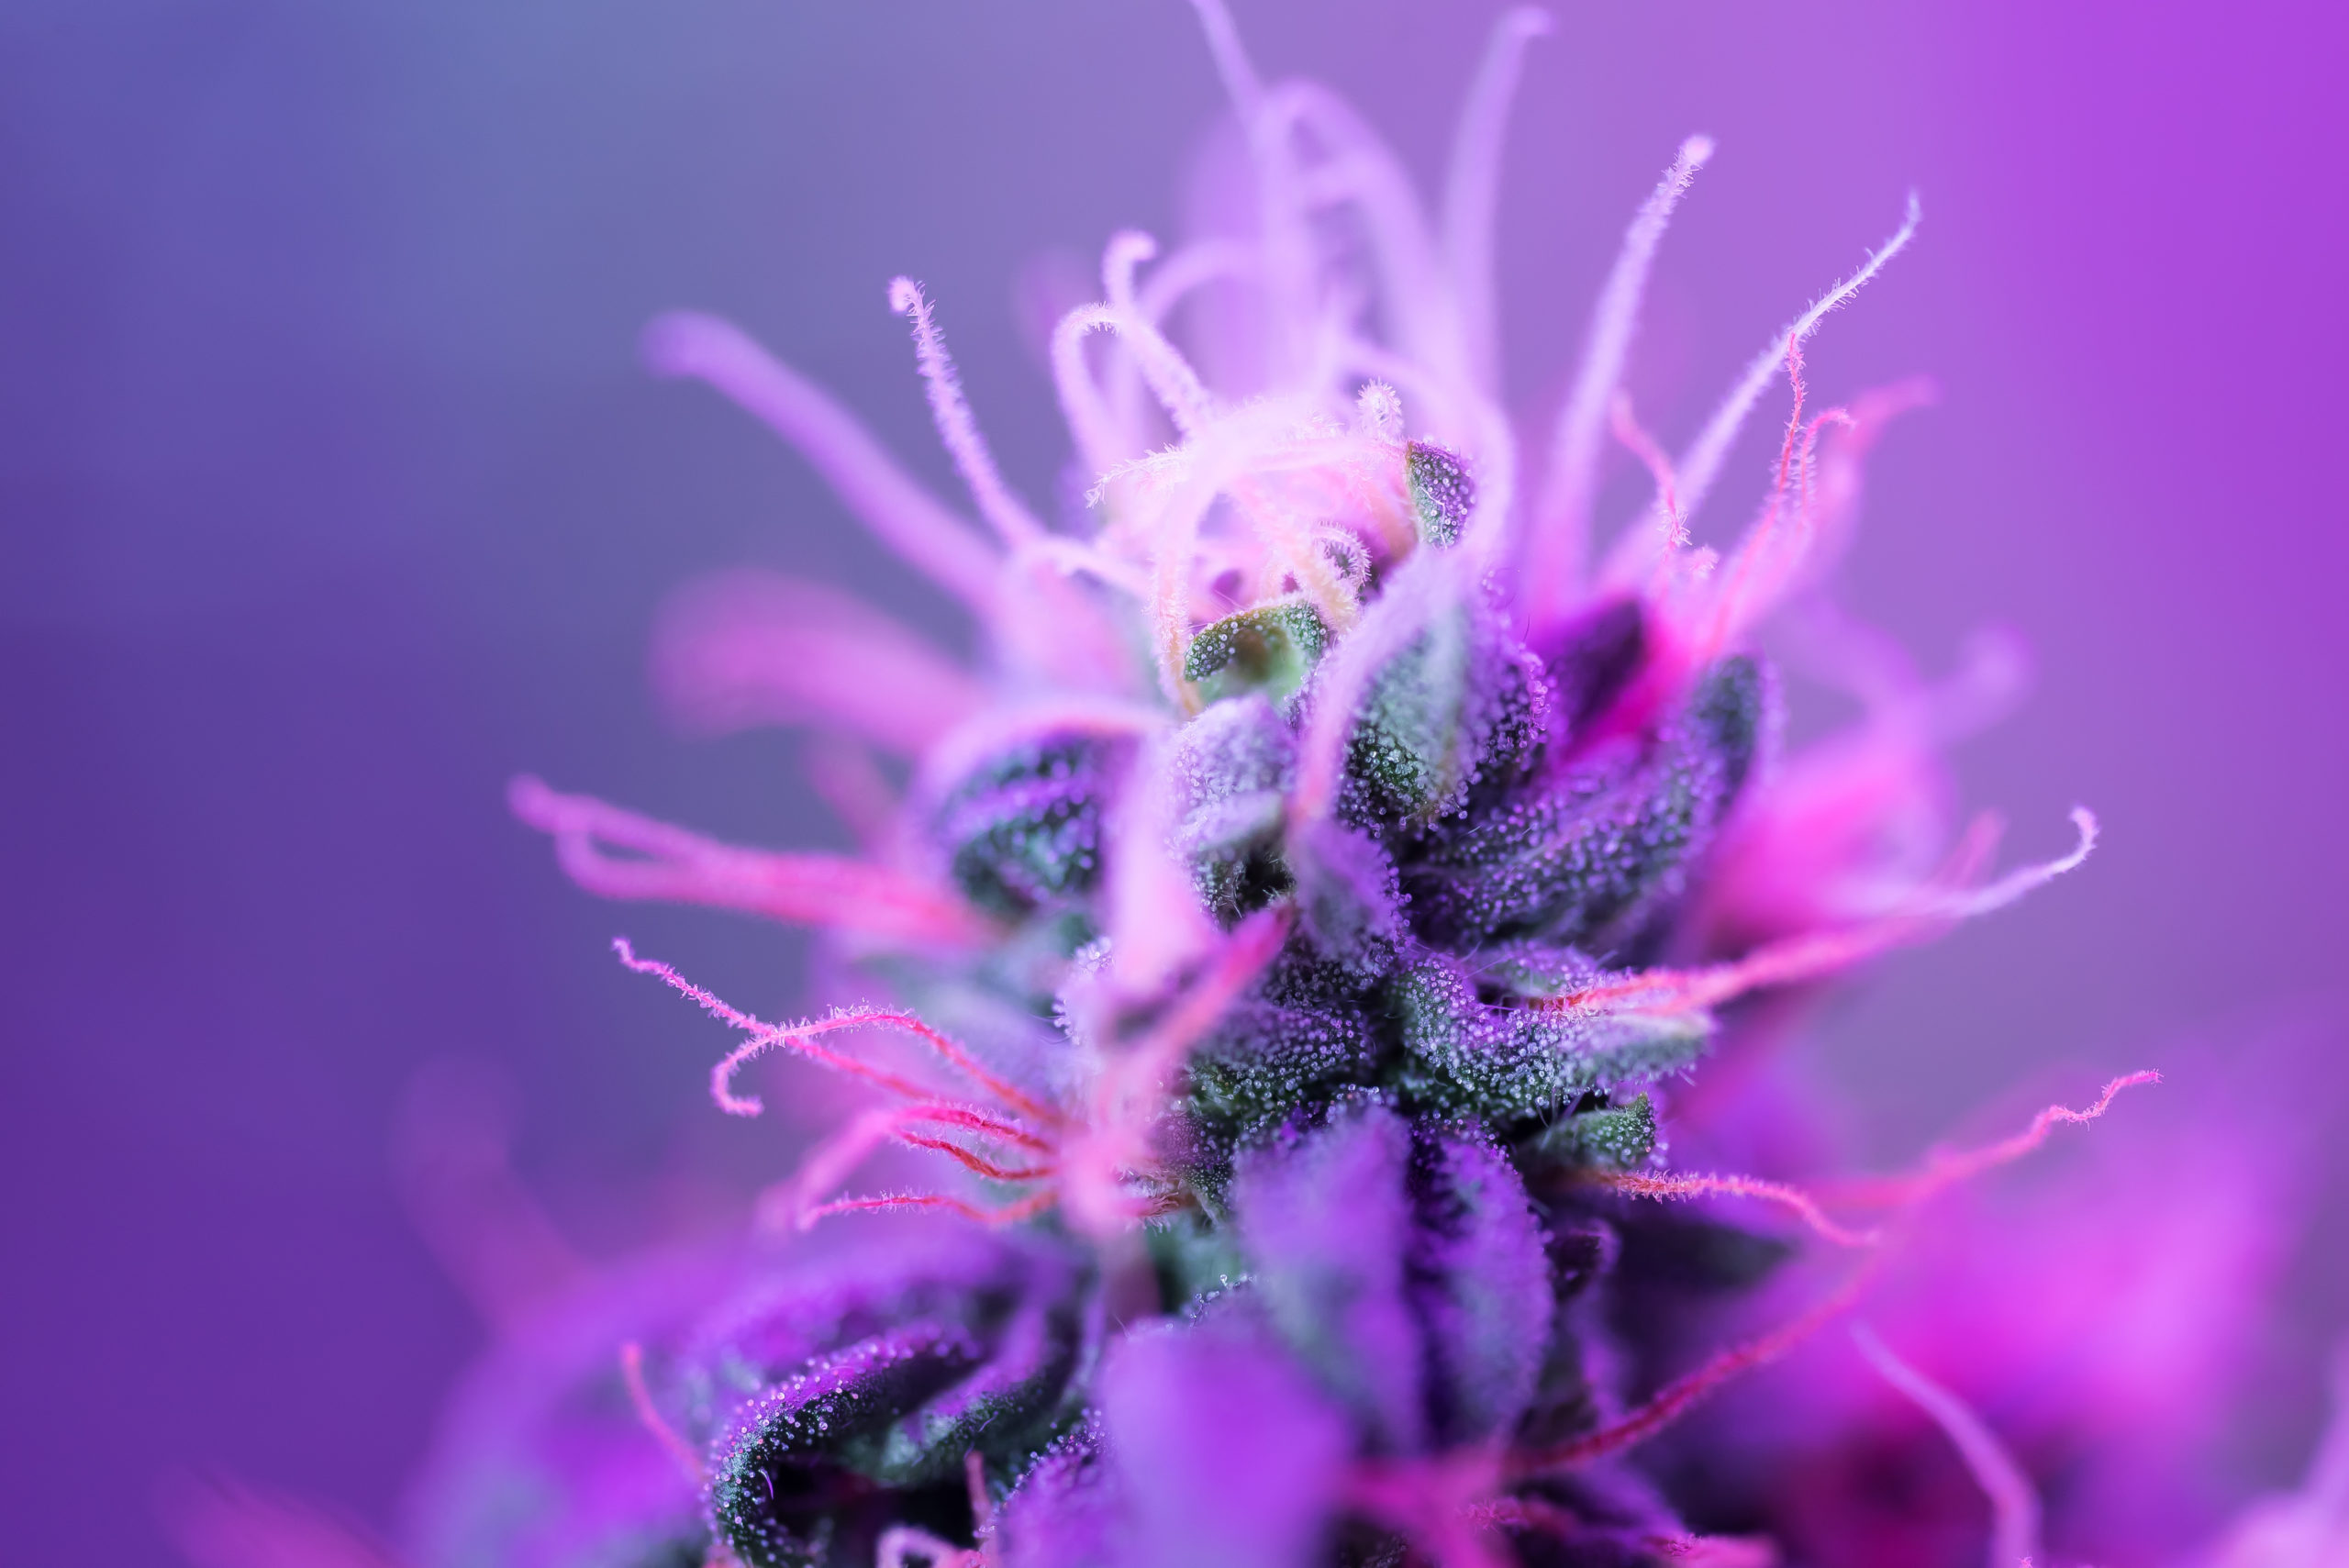 The Best New Cannabis Strains to Grow in 2020.